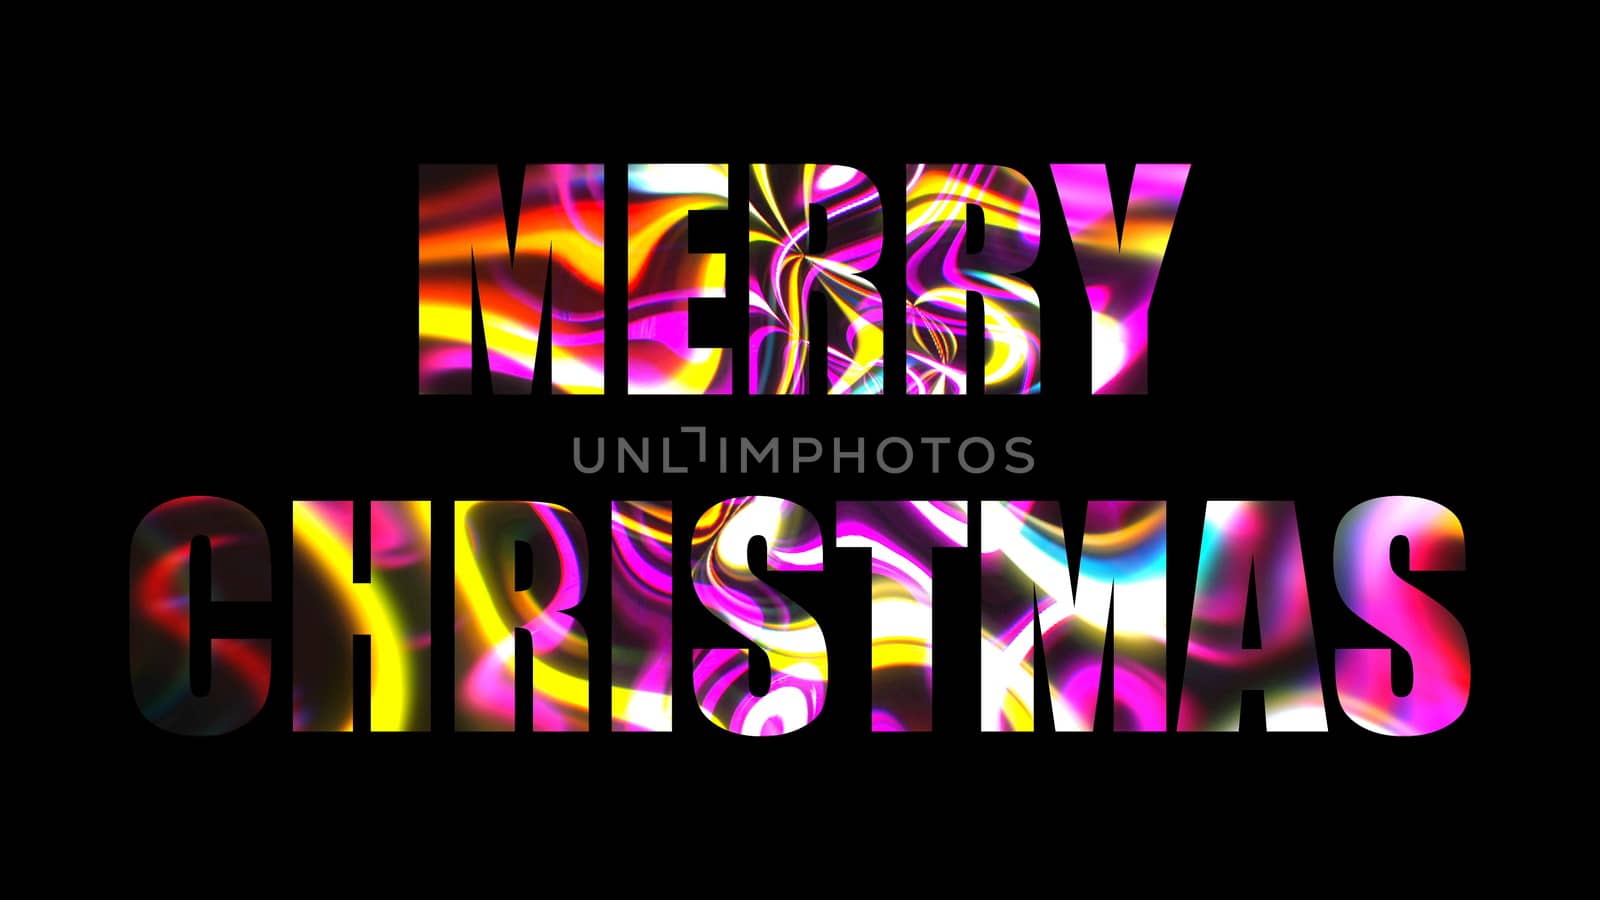 Merry christmas shiny bright text, 3d rendering background, computer generating for holidays festive design